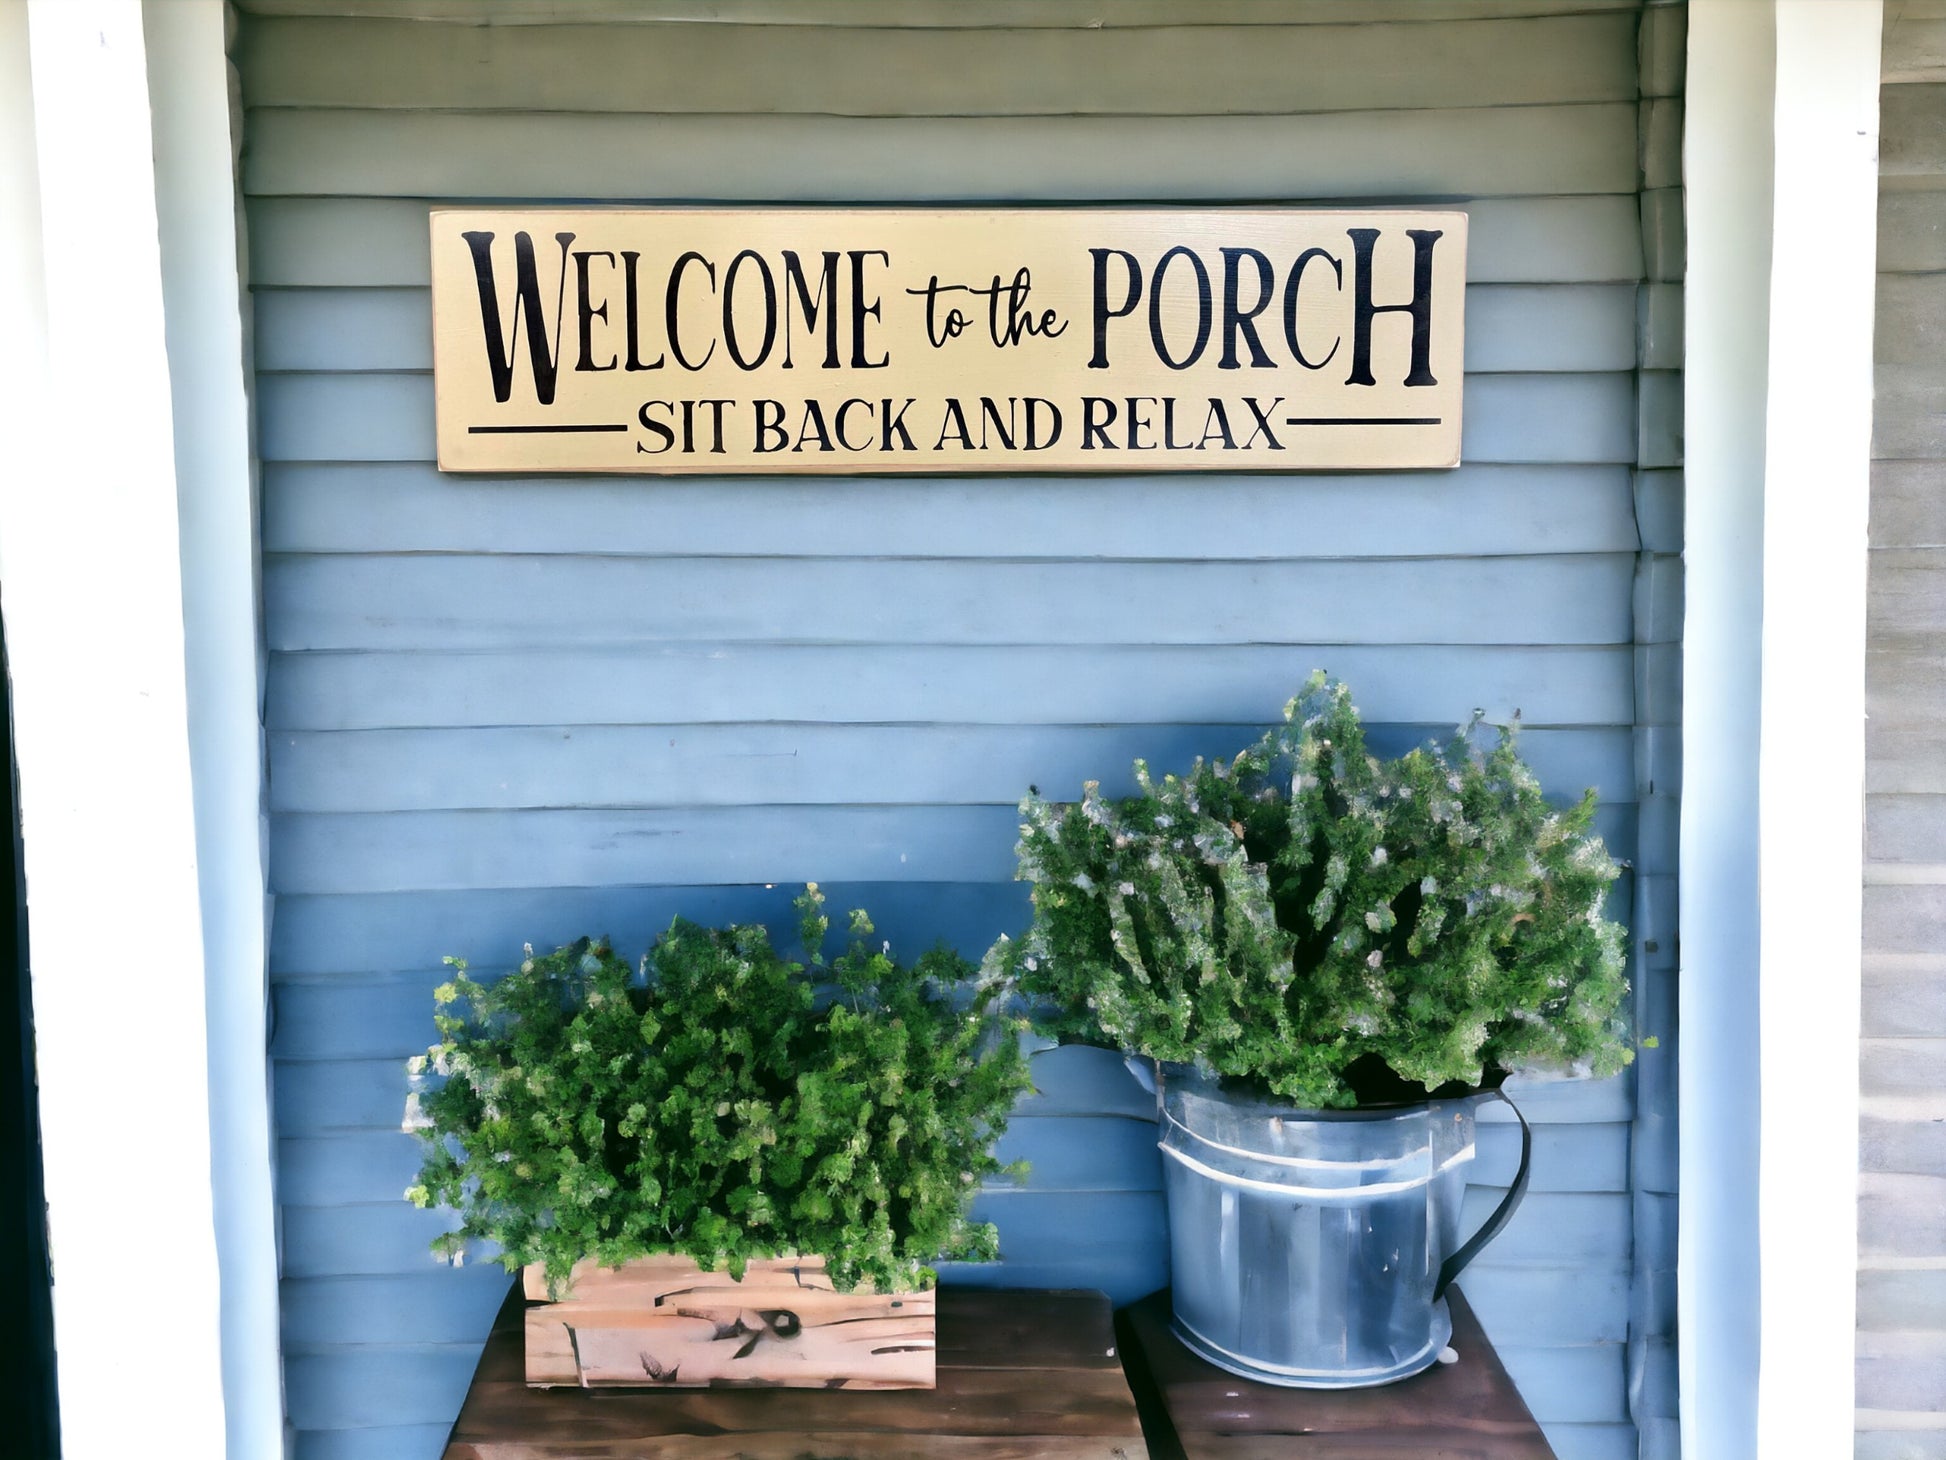 Handpainted wood sign reading 'Welcome To The Porch Sit Back And Relax' with a light cream background and black text, perfect for welcoming guests to your porch.